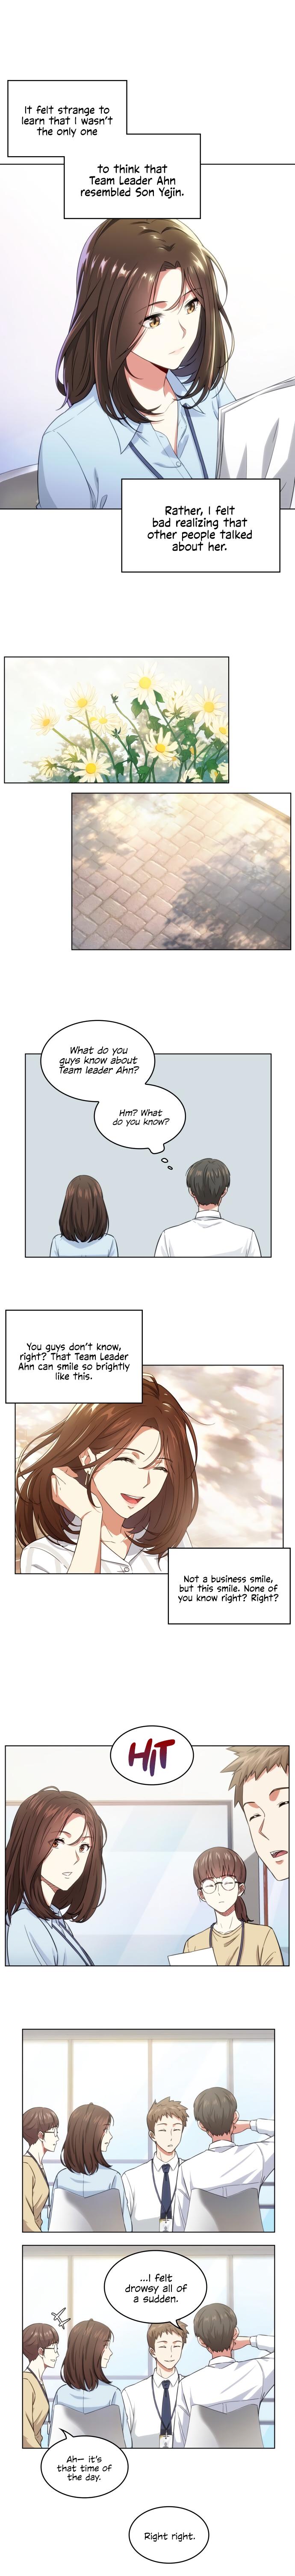 My Office Noona's Story - Chapter 46 - Coffee Manga